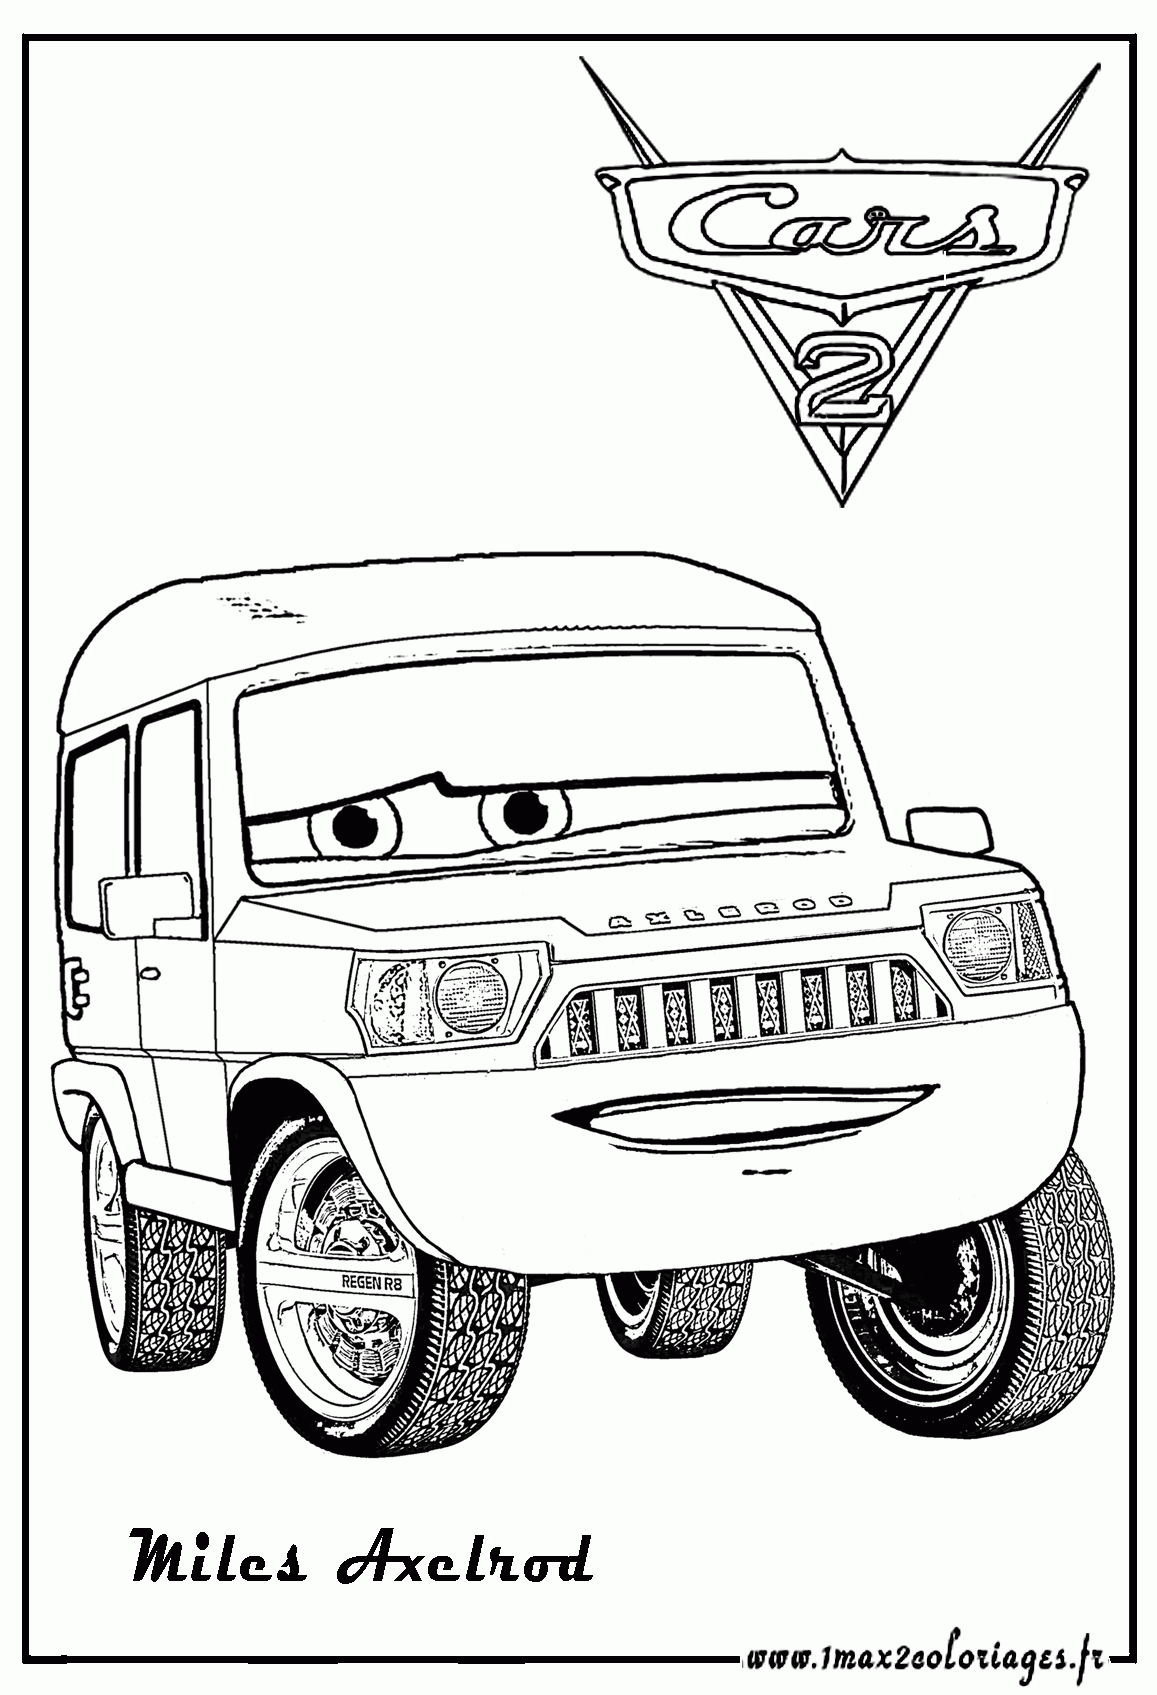 Coloring Pages ALL CARS 2 - Coloring Home